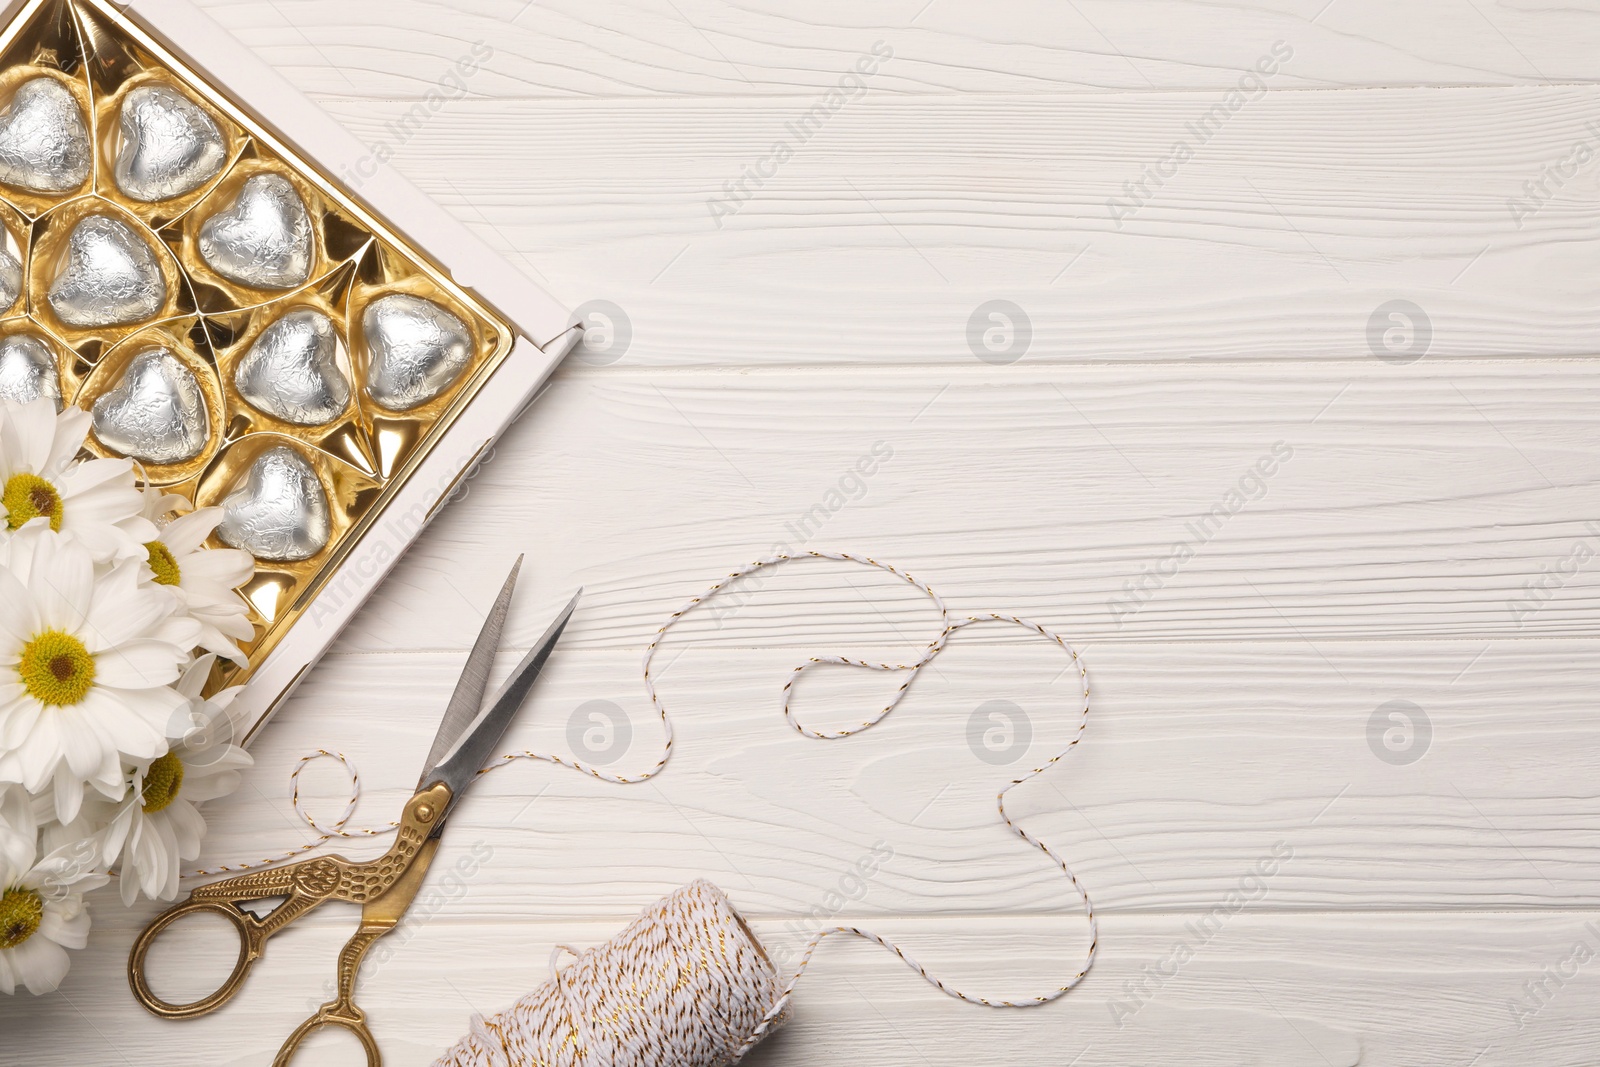 Photo of Delicious heart shaped chocolate candies, scissors and twine on white wooden table, flat lay. Space for text